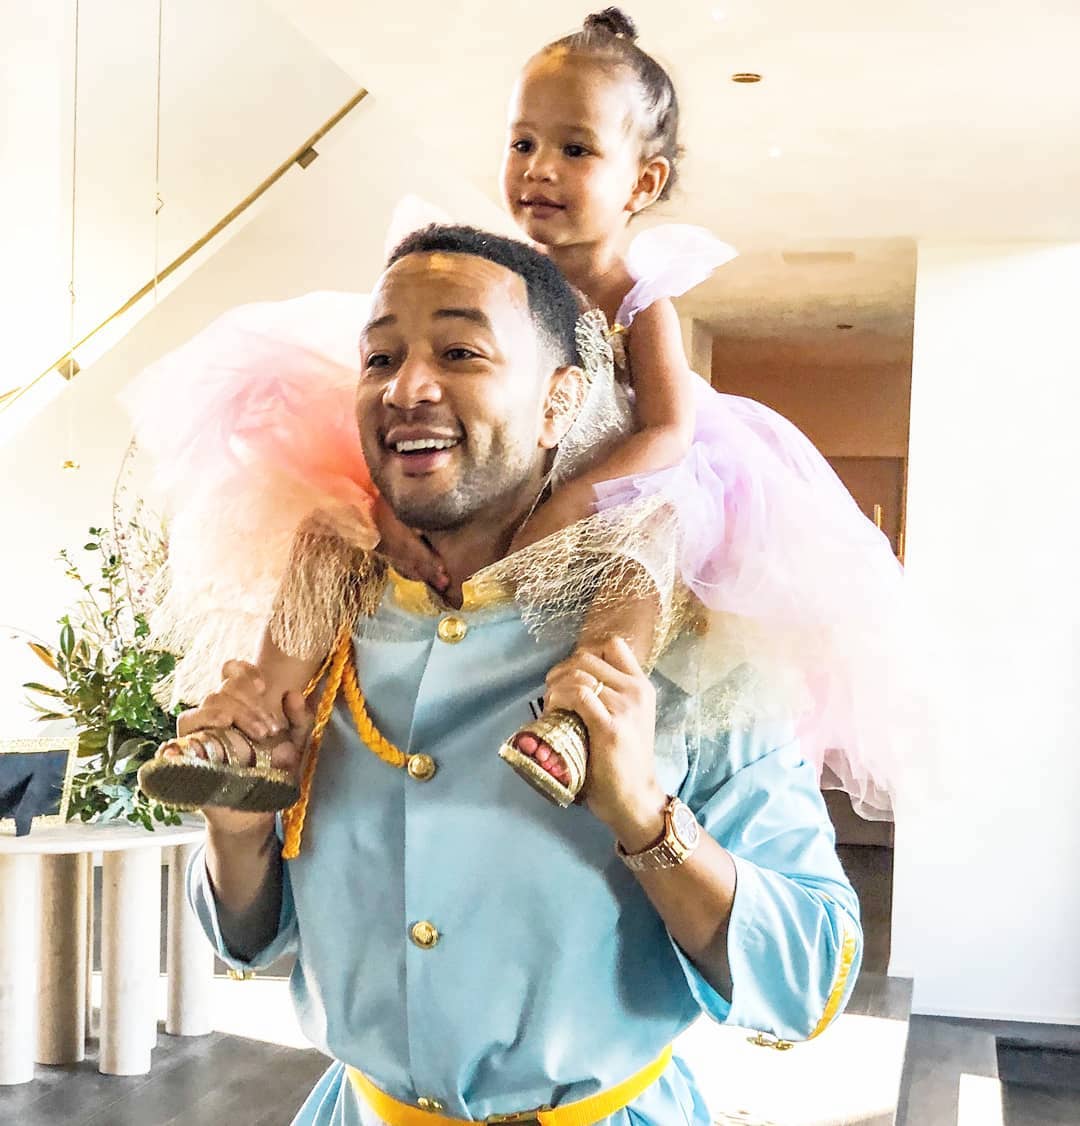 John Legend with daughter Luna Legend stealing our hearts this Halloween with the sweetest father-daughter costumes (photo: @johnlegend on Instagram)